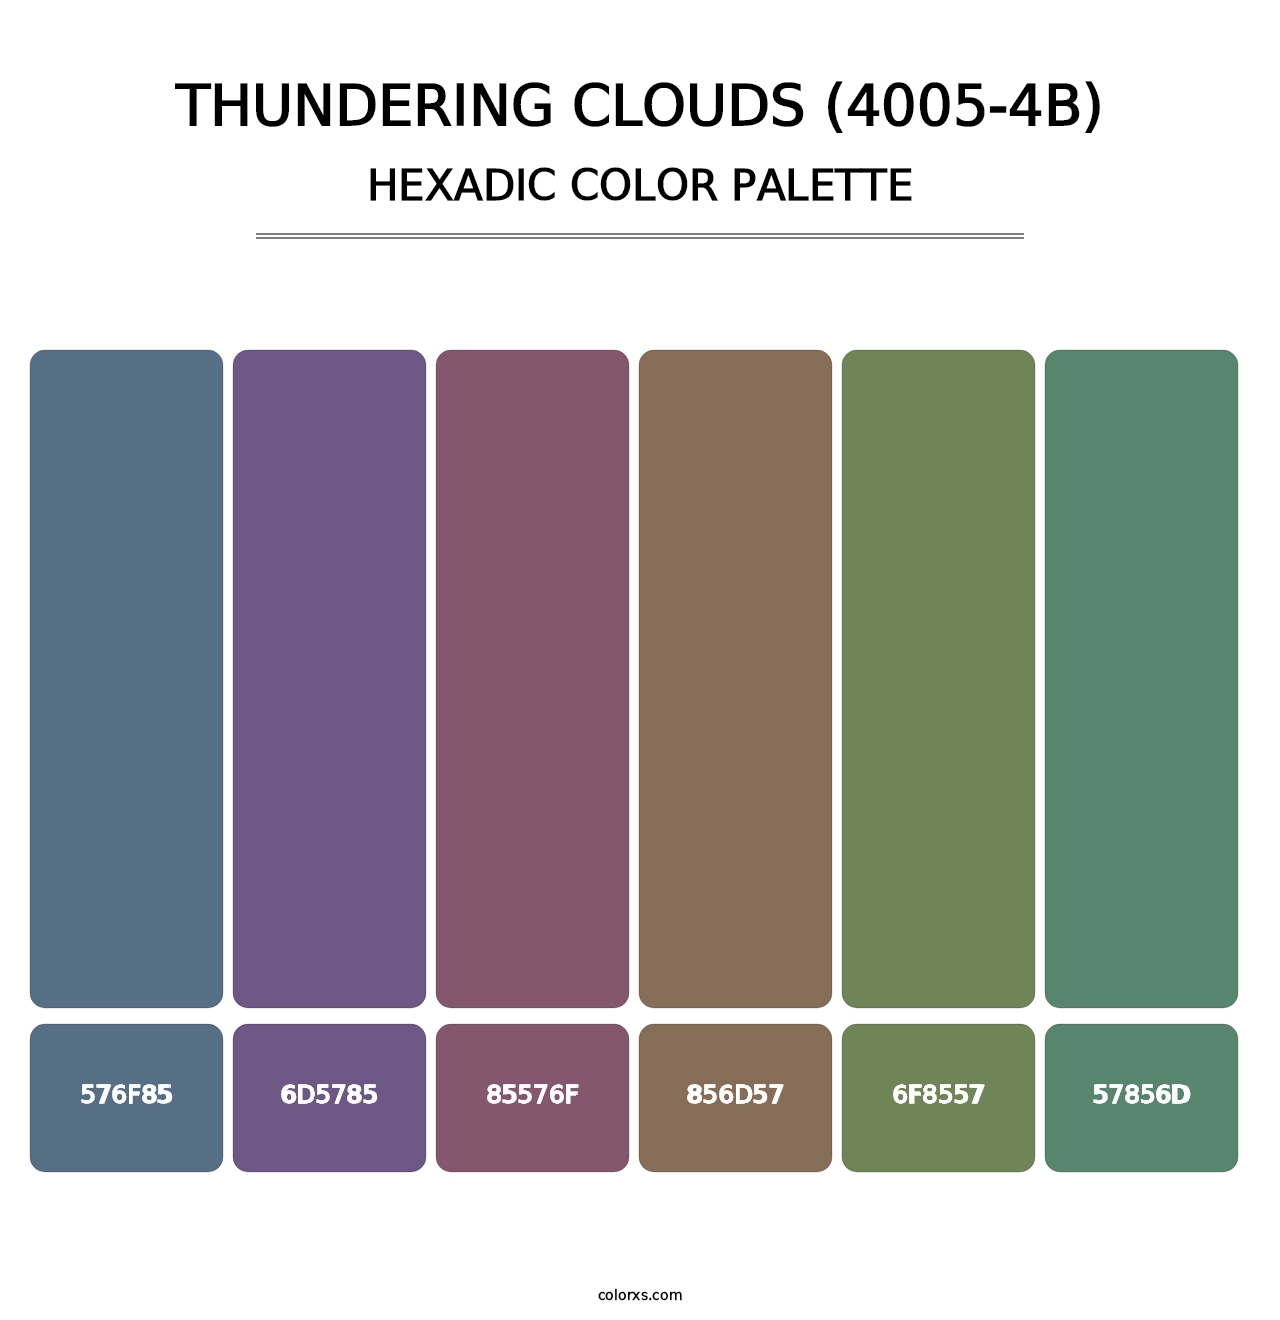 Thundering Clouds (4005-4B) - Hexadic Color Palette